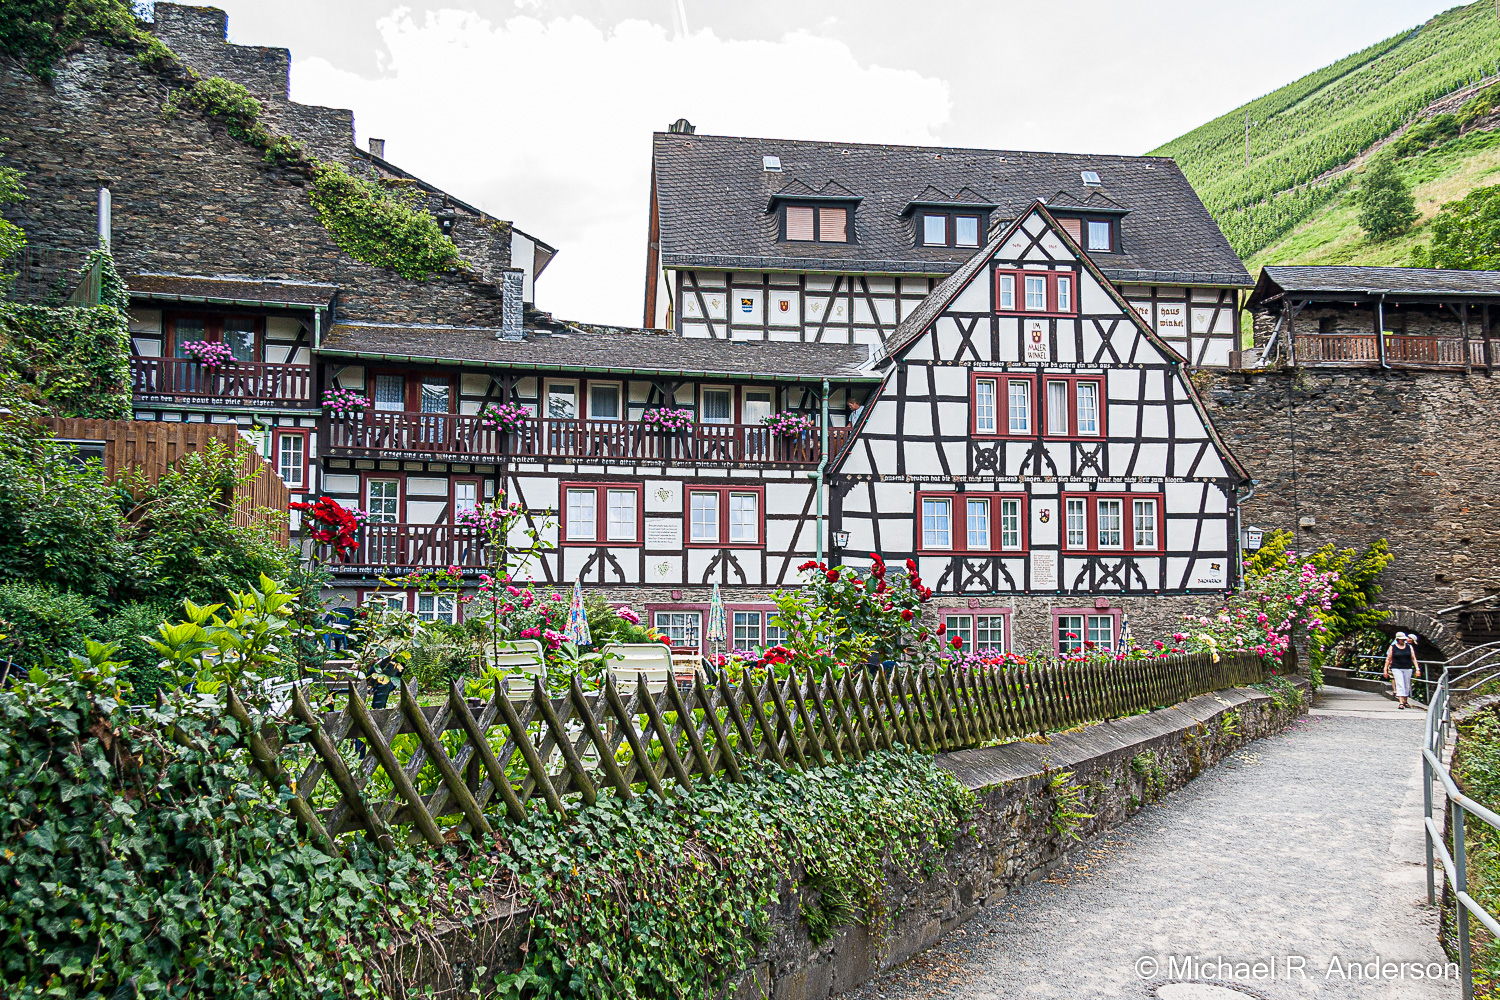 Pension im Malerwinkel, our bed and breakfast in Bacharach